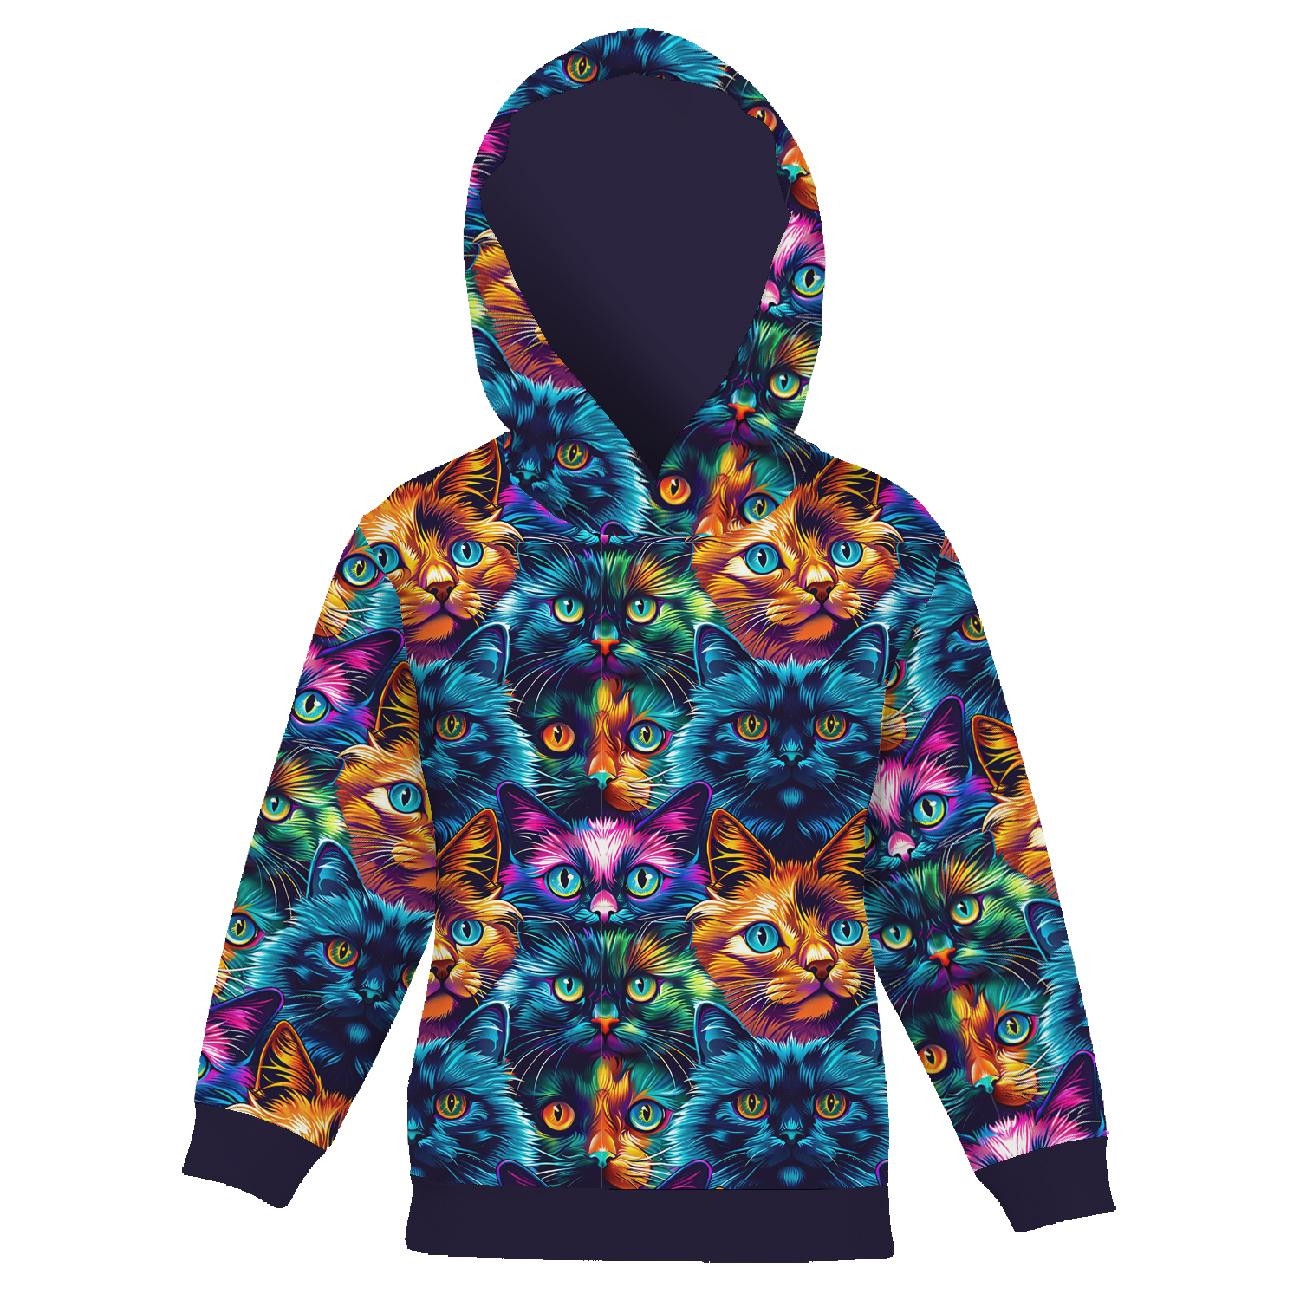 KID'S HOODIE (ALEX) - COLORFUL CATS  - sewing set